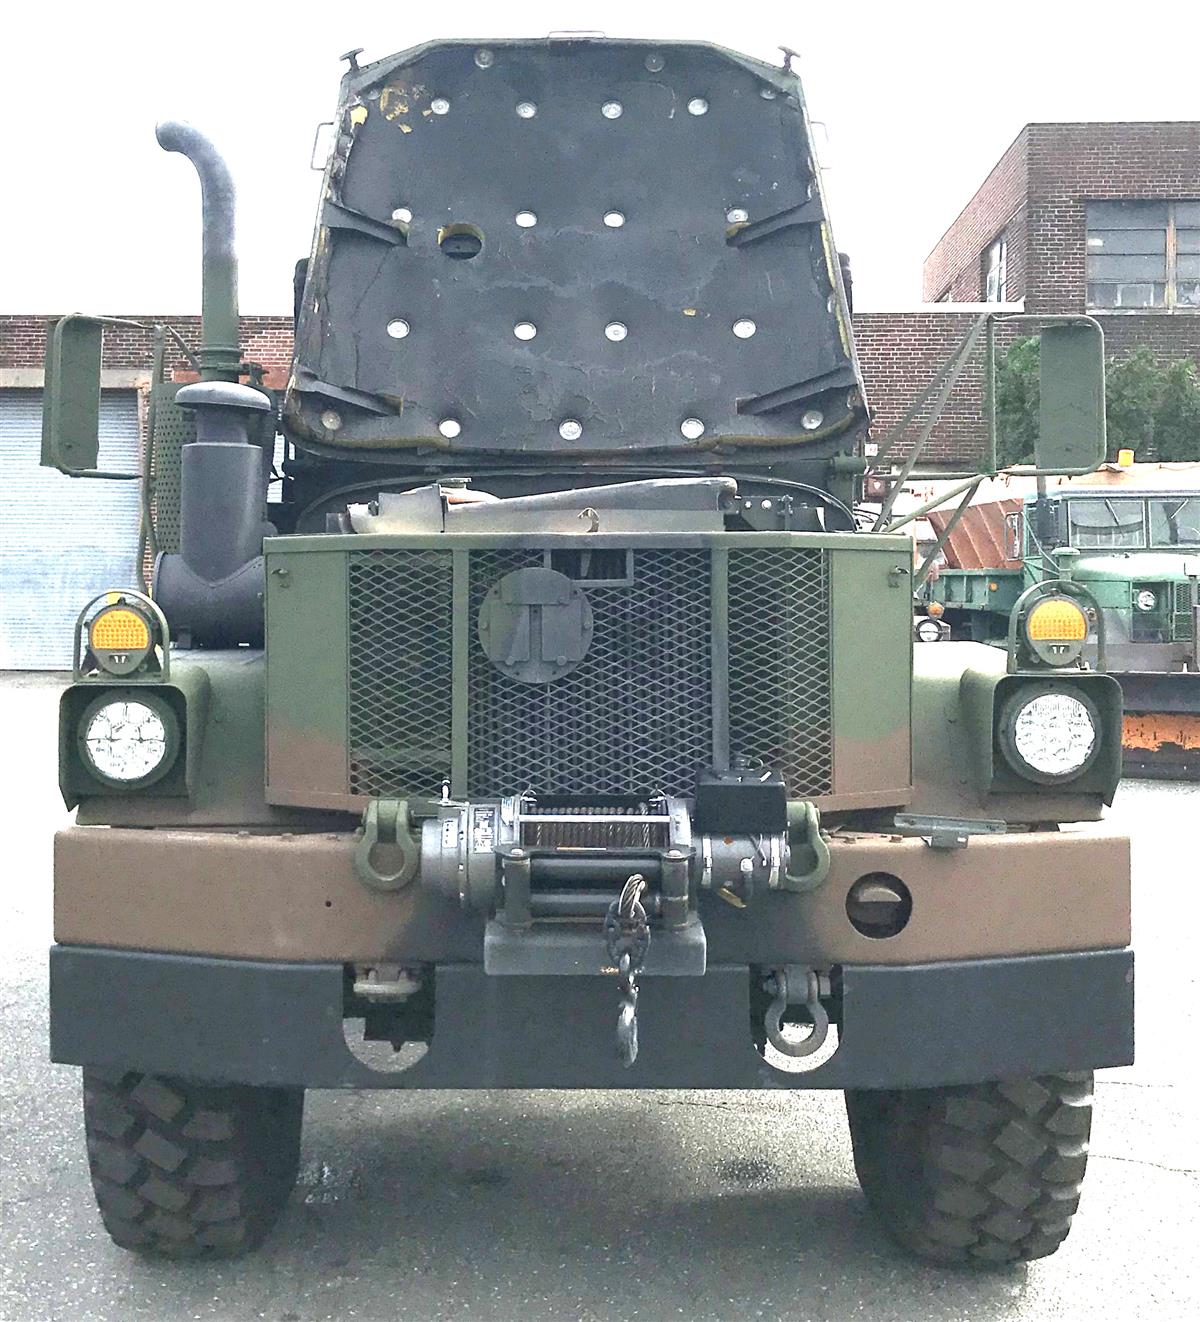 T-09242018-11 | Bobbed AM General M35A3 With 24V Winch (34).JPG